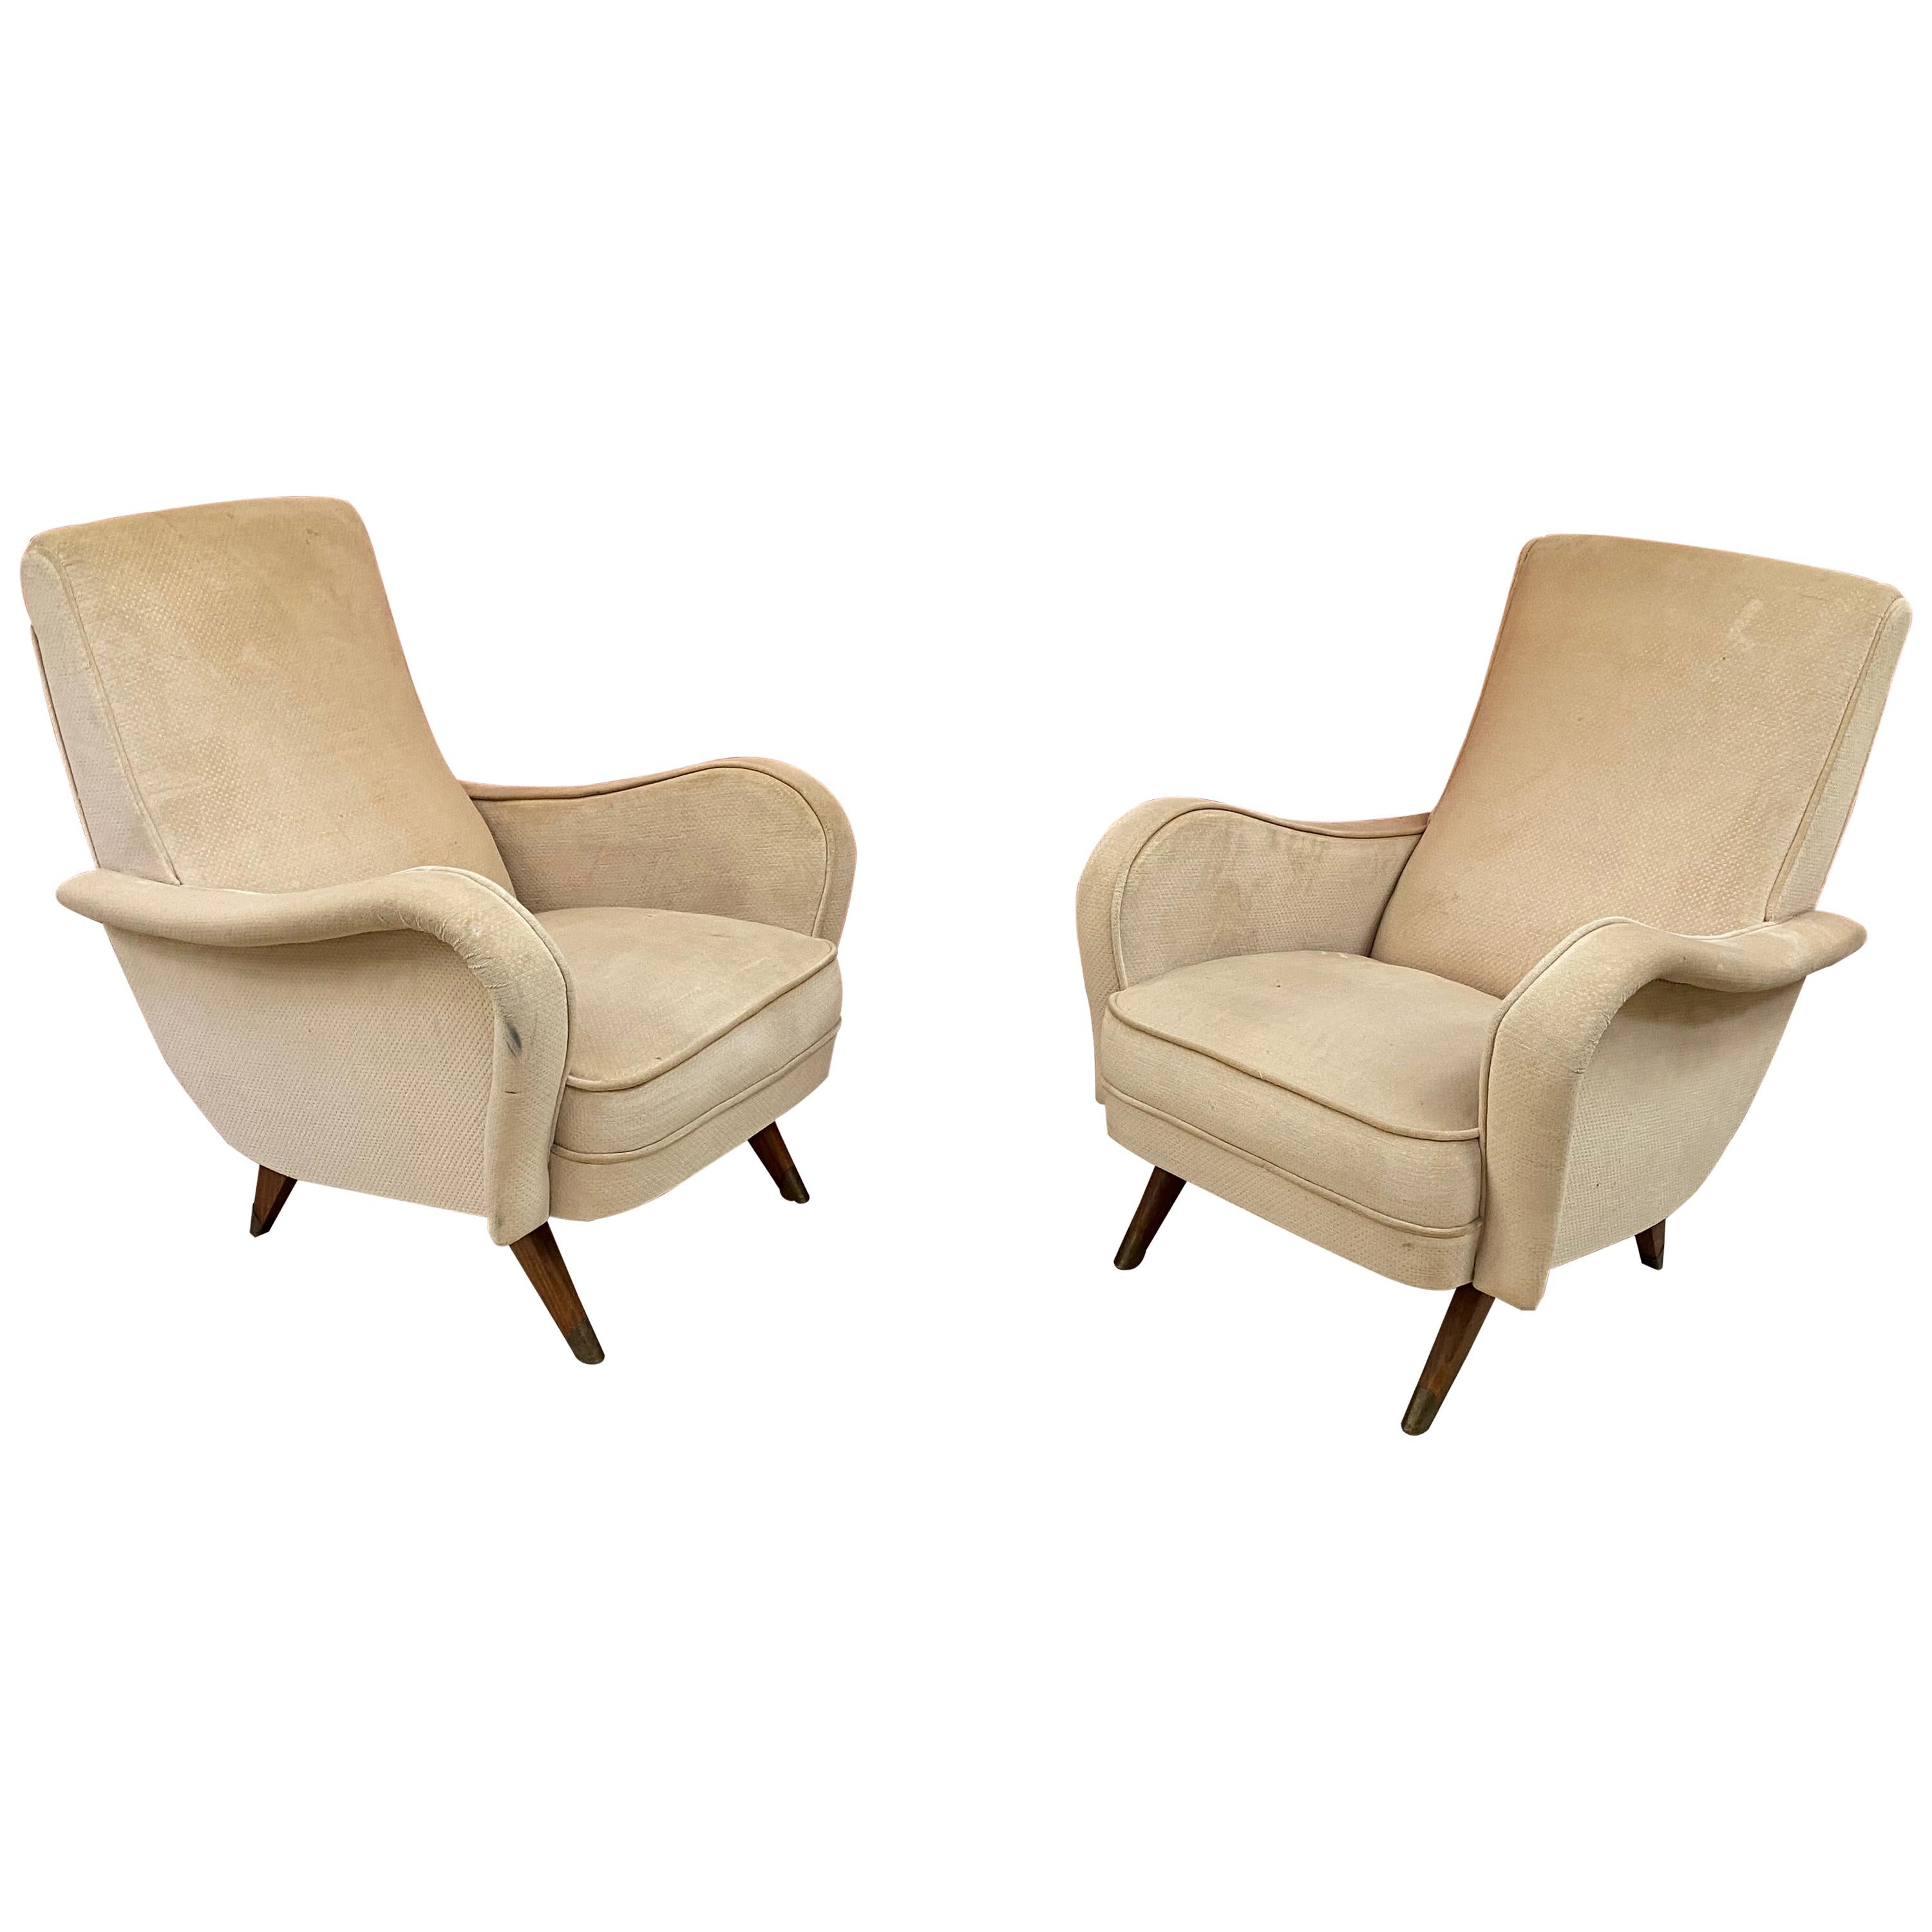 Erton, Pair of Vintage Armchairs, circa 1950 For Sale